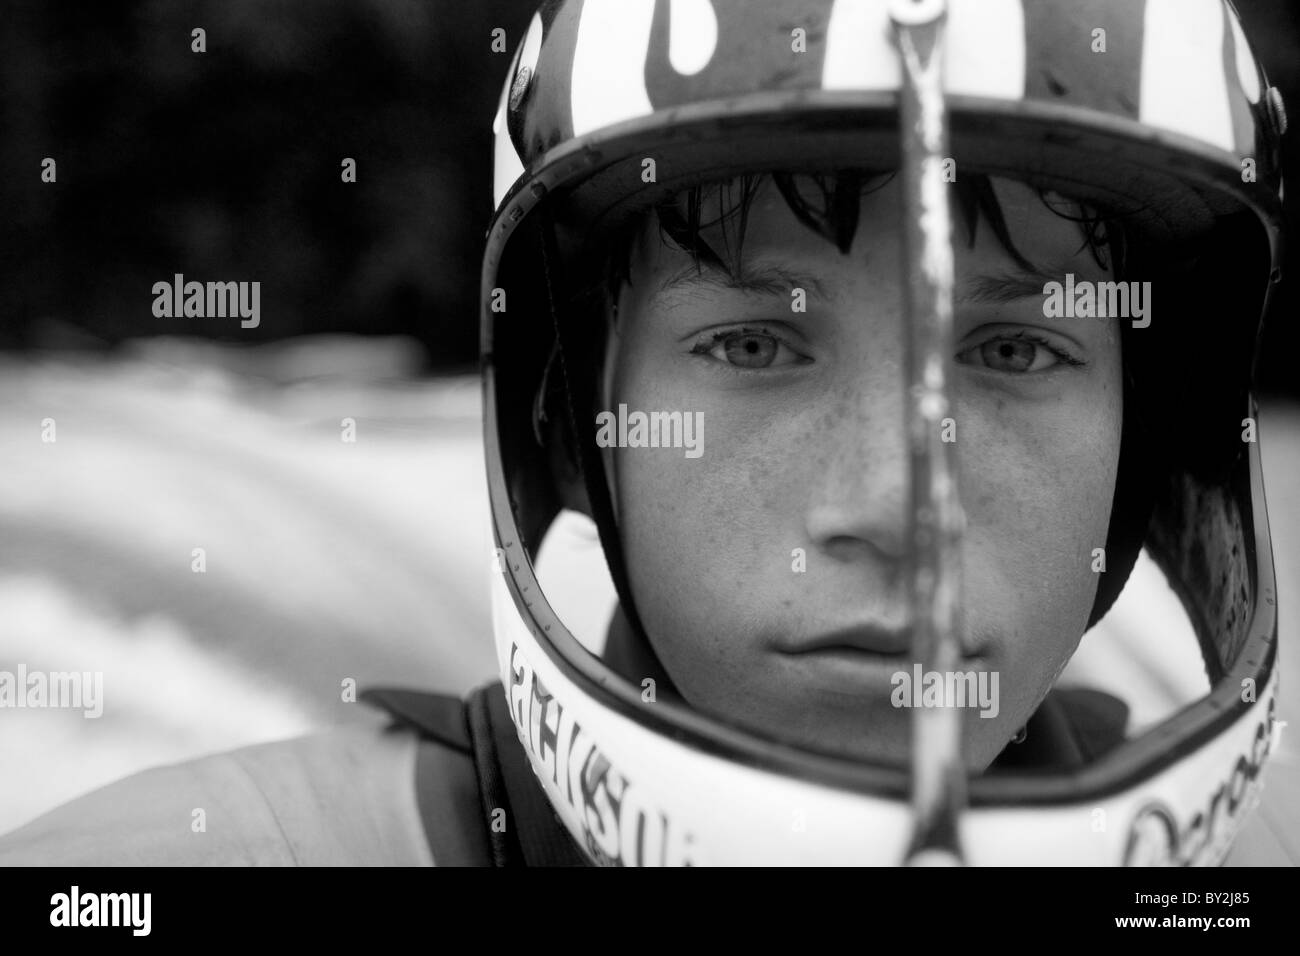 Black and white portrait of a young kayaker wearing a full face helmet. Stock Photo